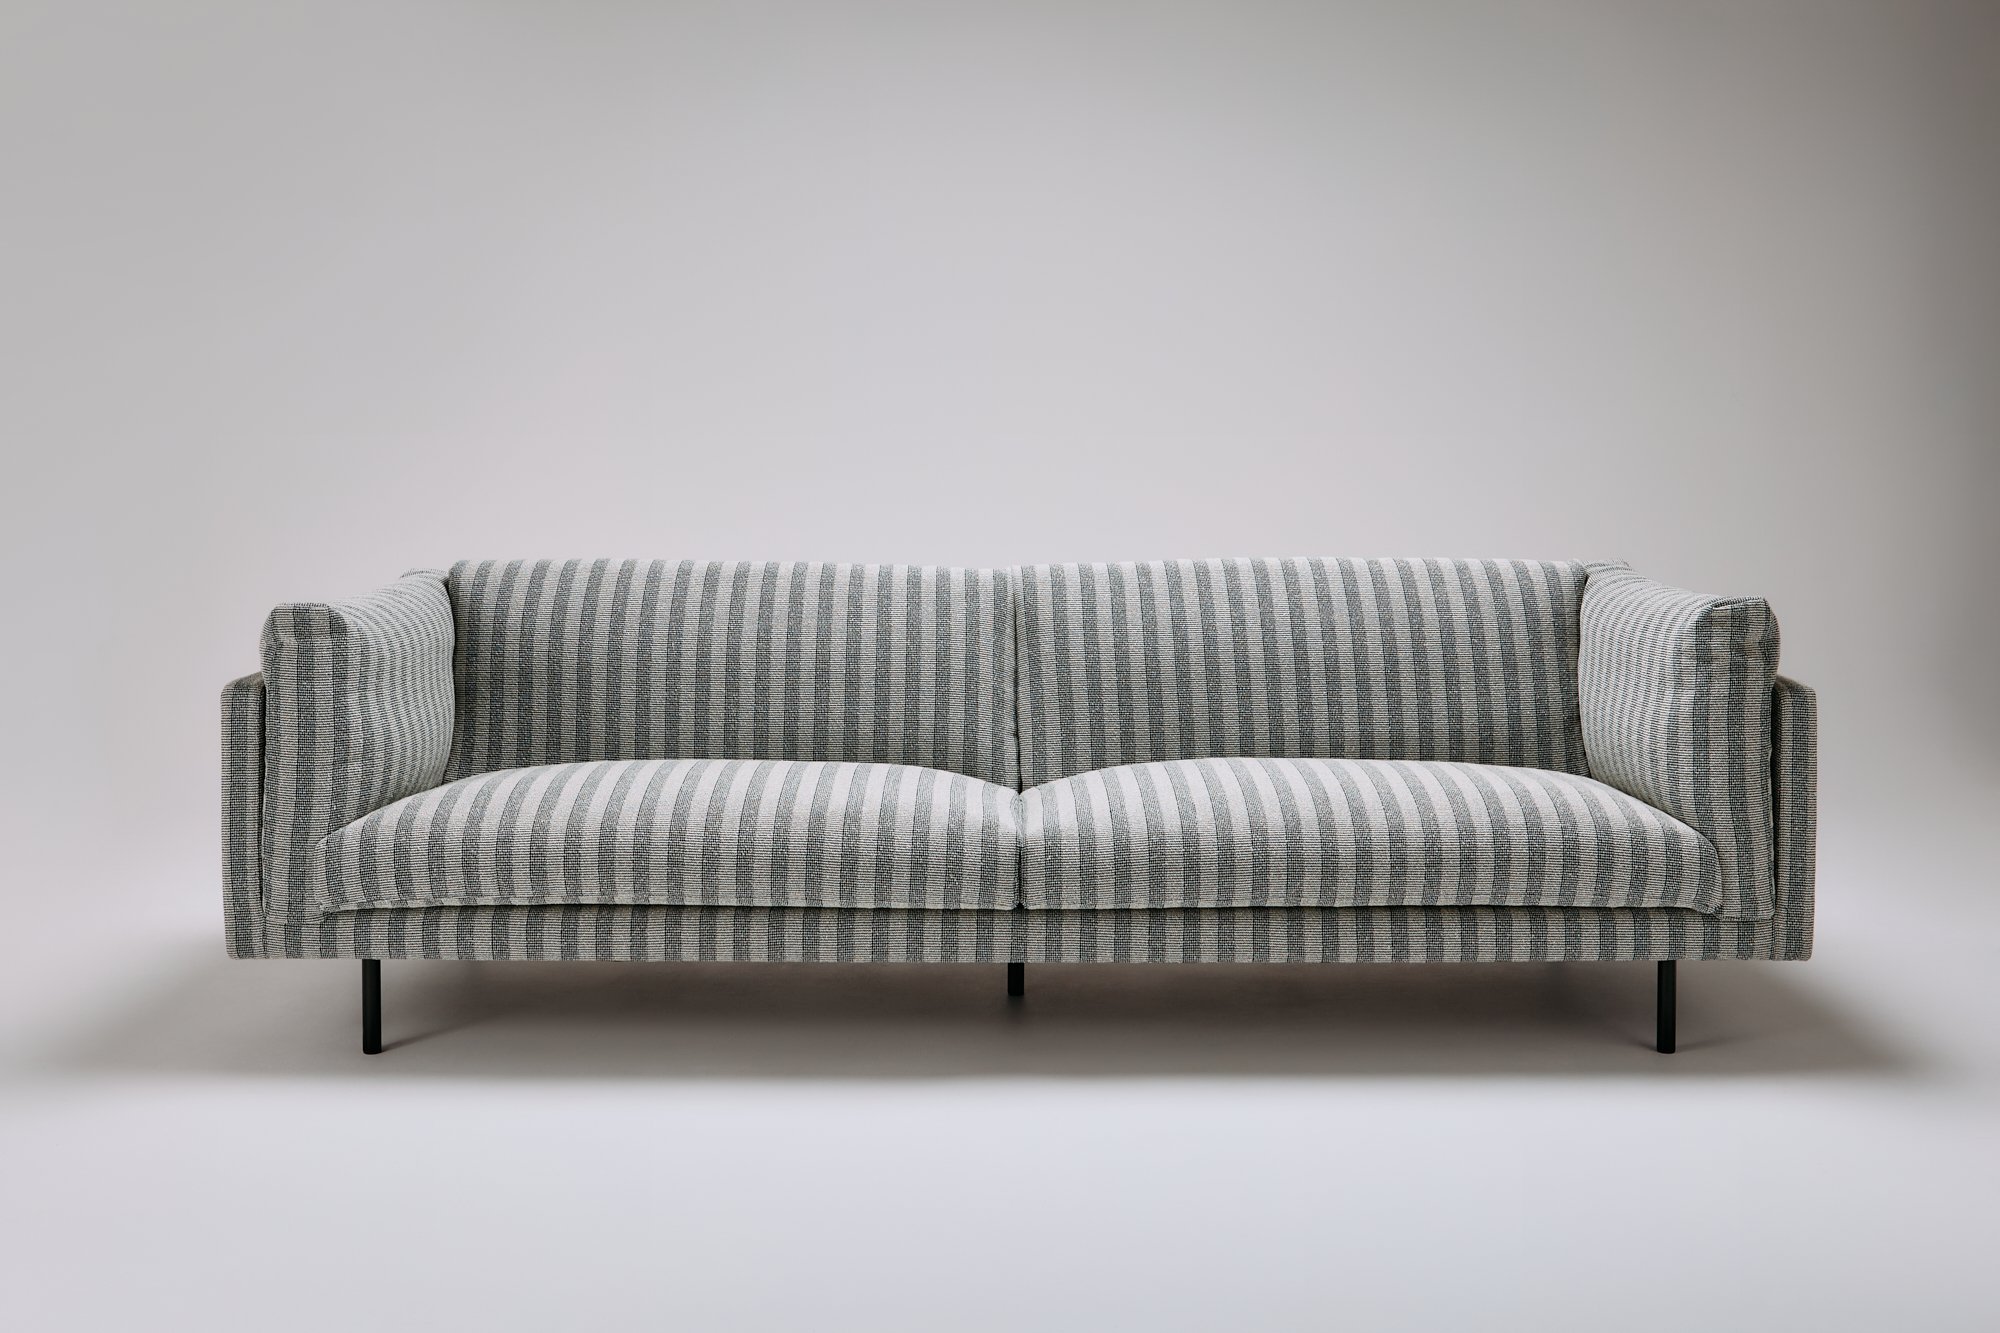 graziaco-harvey-relaxed-with-straight-leg-in-pulsar-upholstery_harvey-relaxed-sofa-gestalt-new-york.jpeg